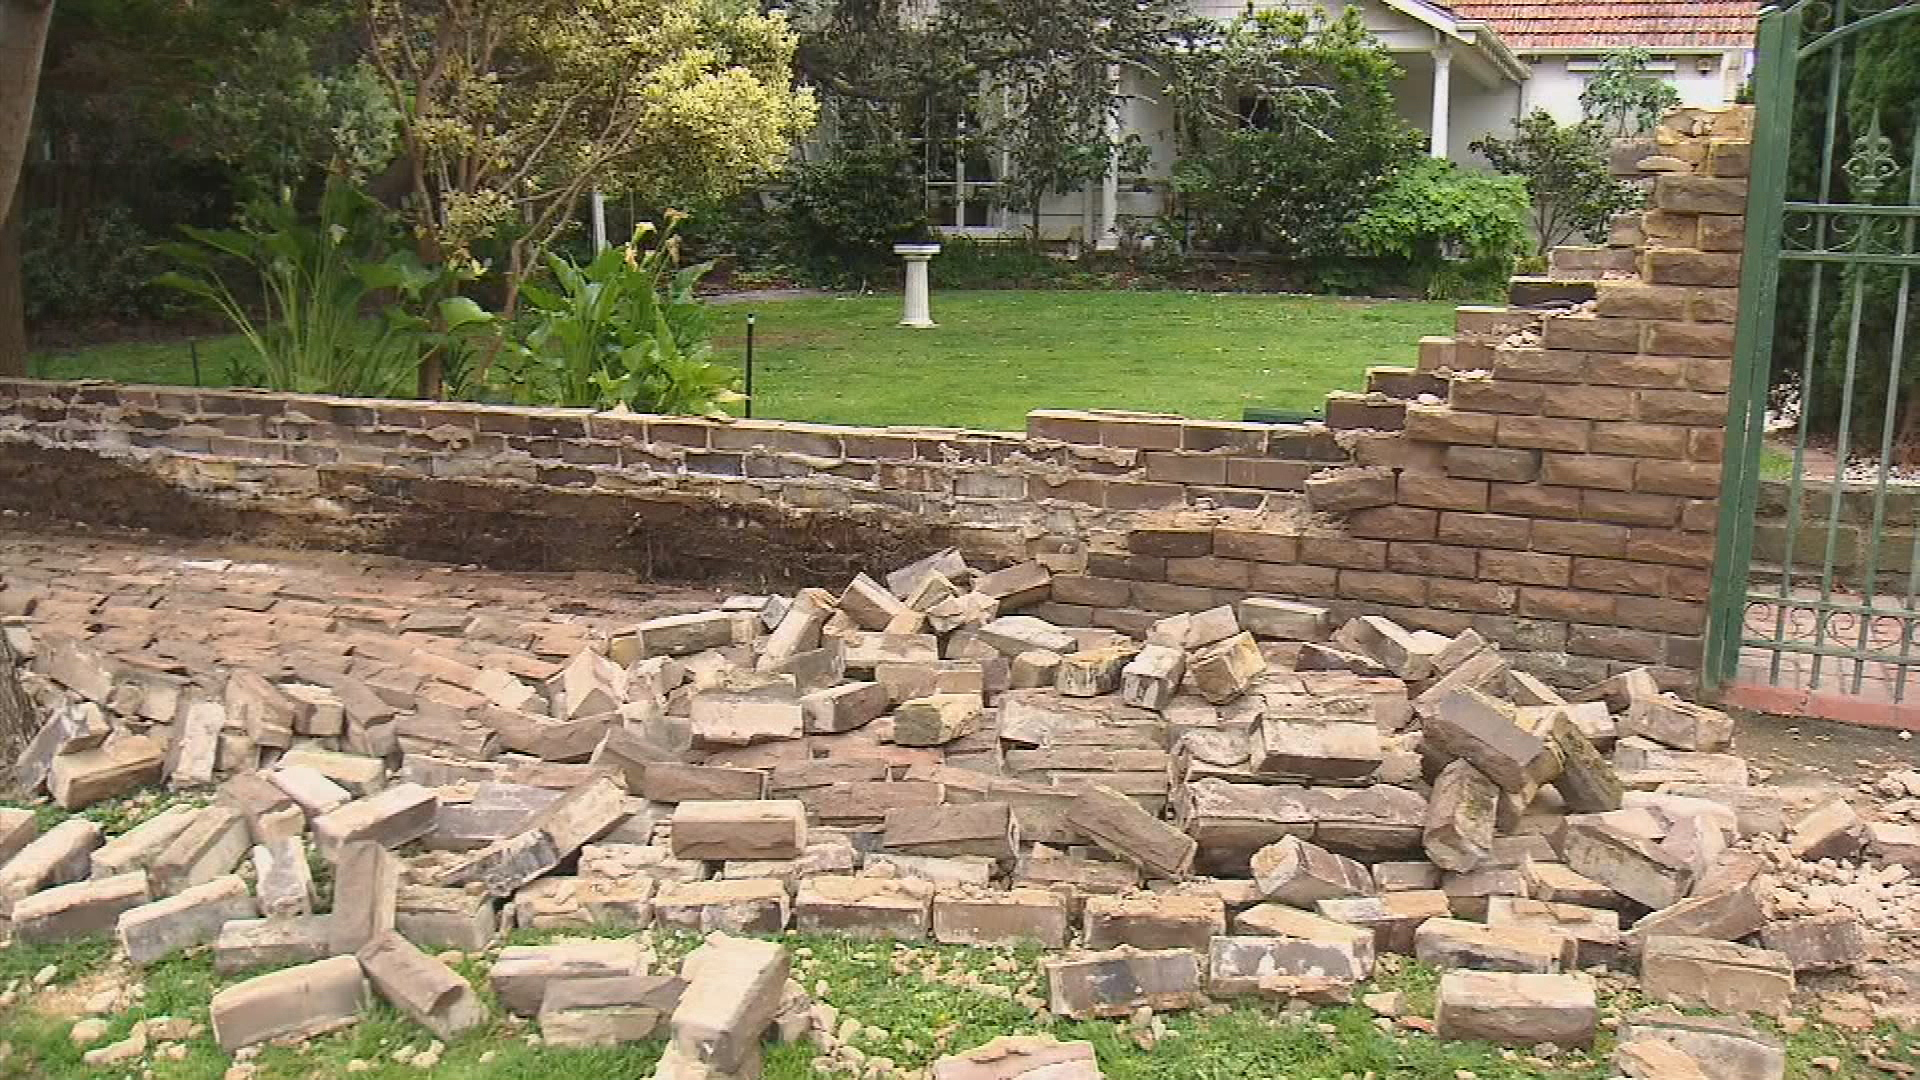 Across Melbourne the damage was limited, but the earthquake did take out this wall.